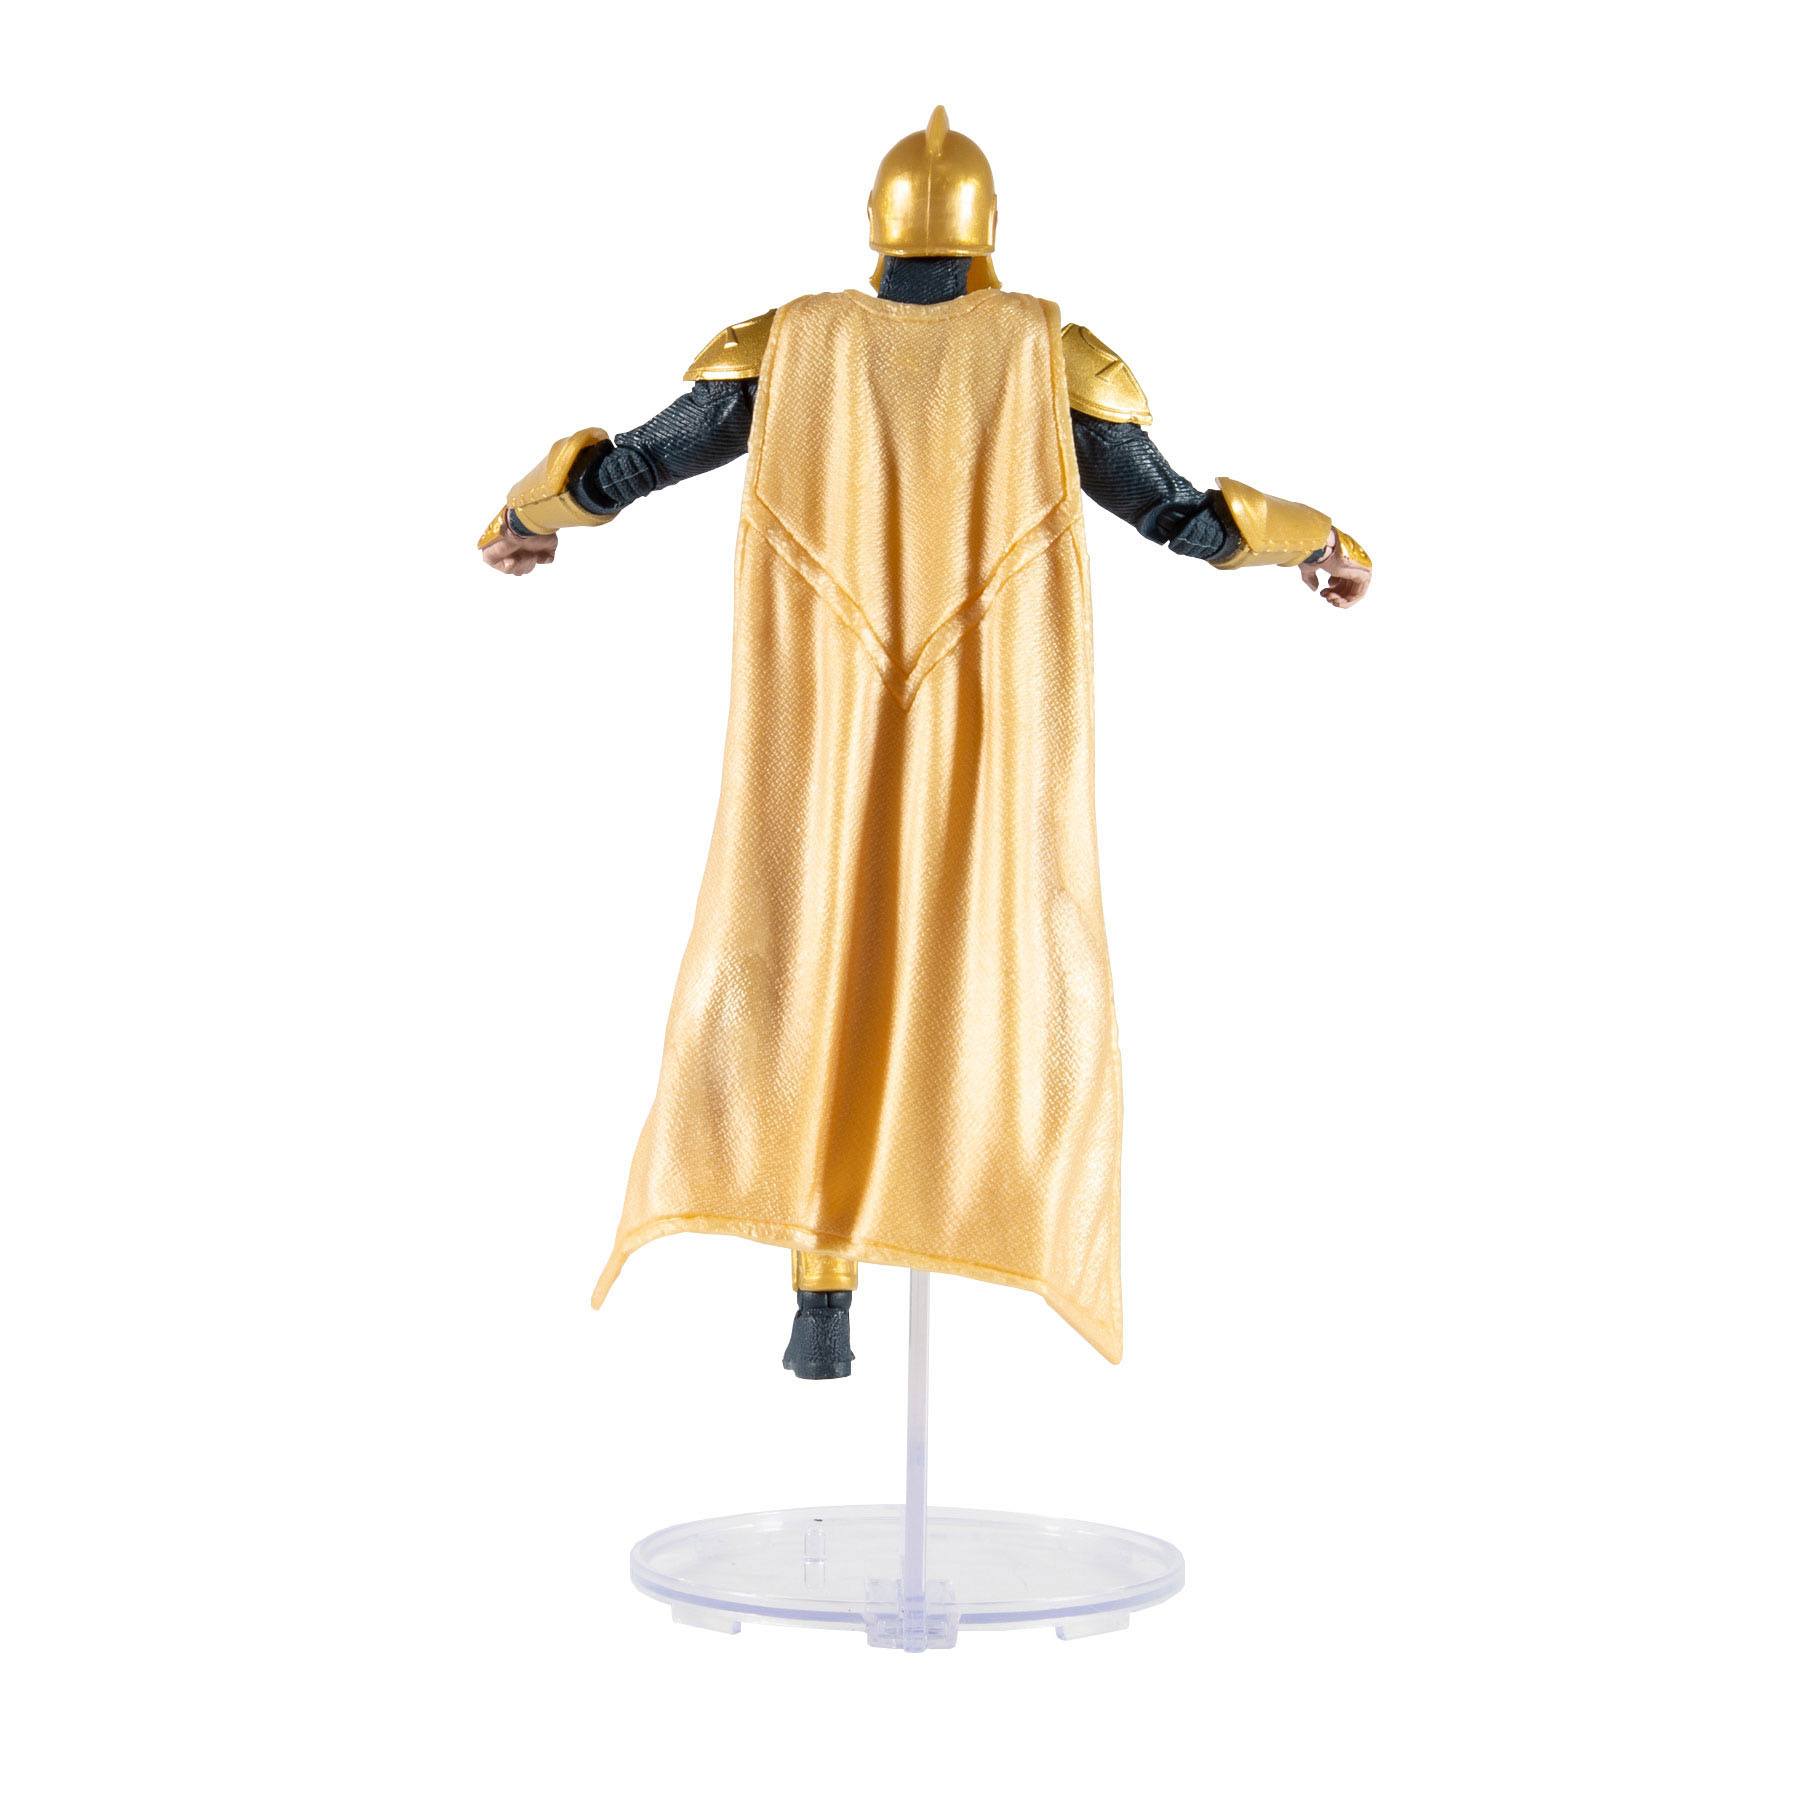 DC Gaming Actionfigur Dr. Fate 18 cm MCF15371 787926153712